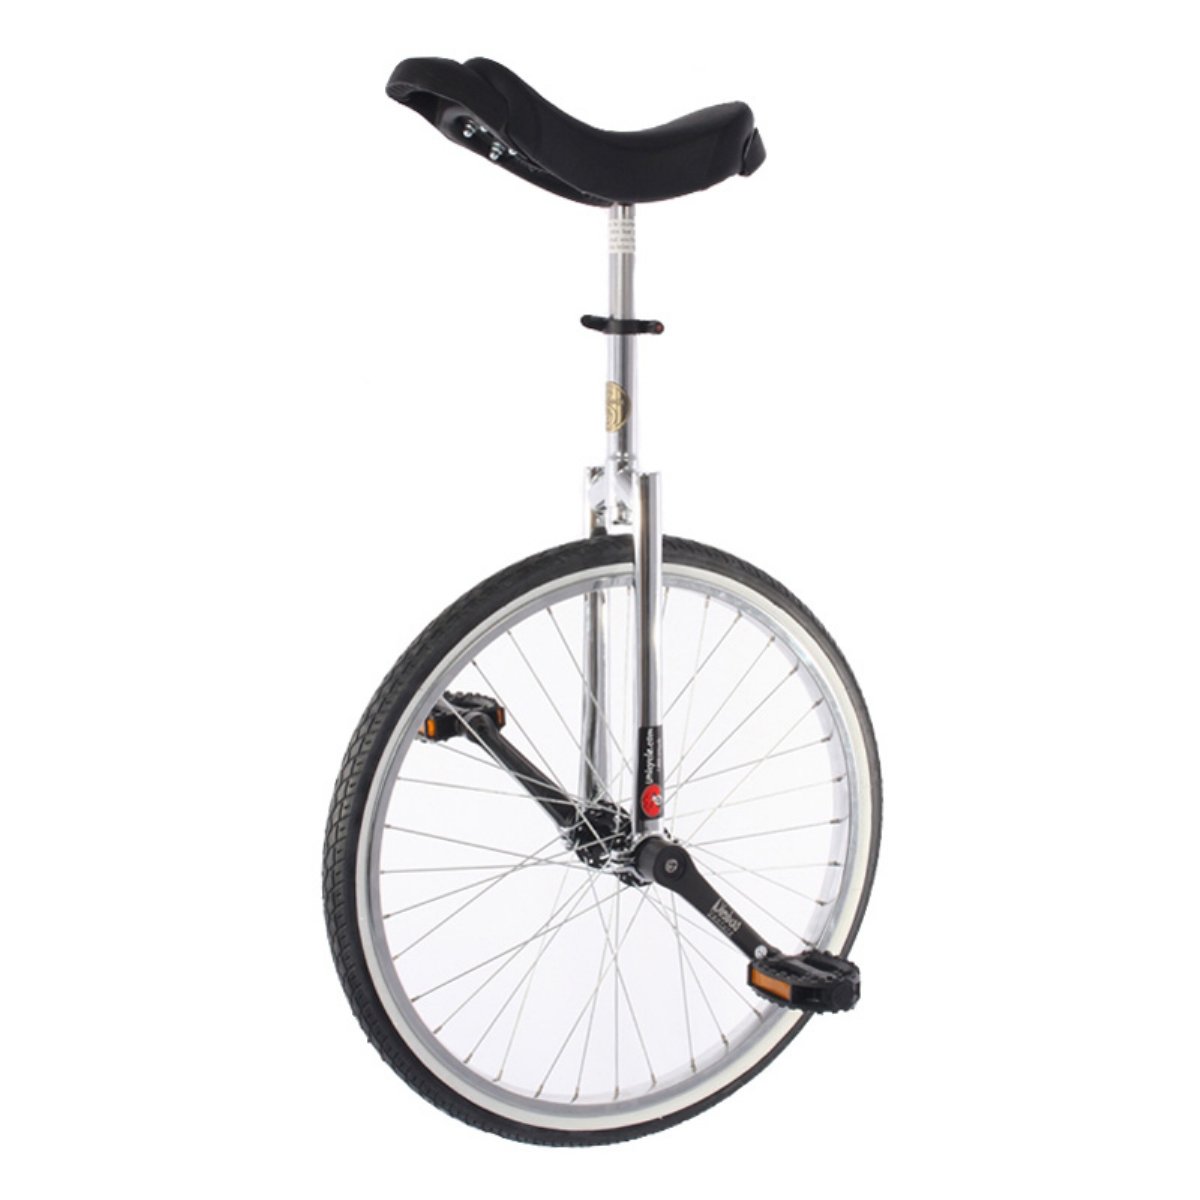 Trainer 24 Inch Beginner Unicycle - Chrome - Unicycles at Hayneedle